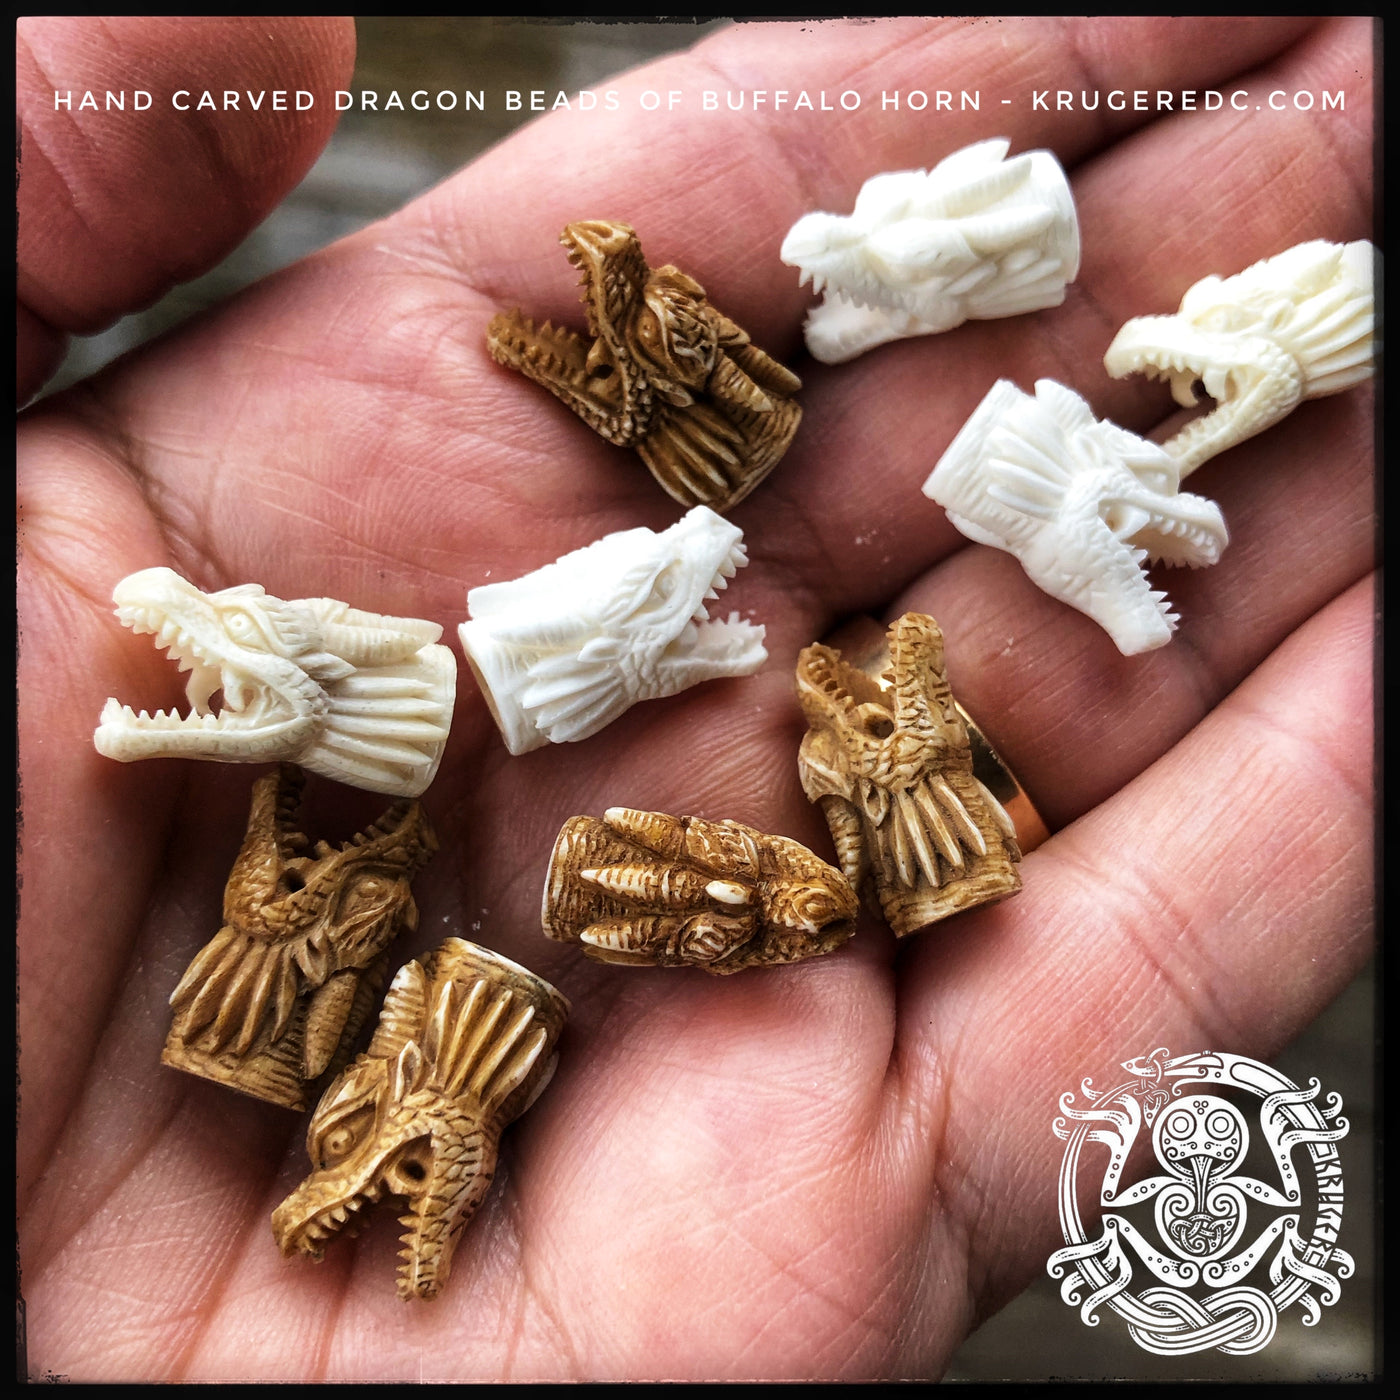 Handcarved dragon beads